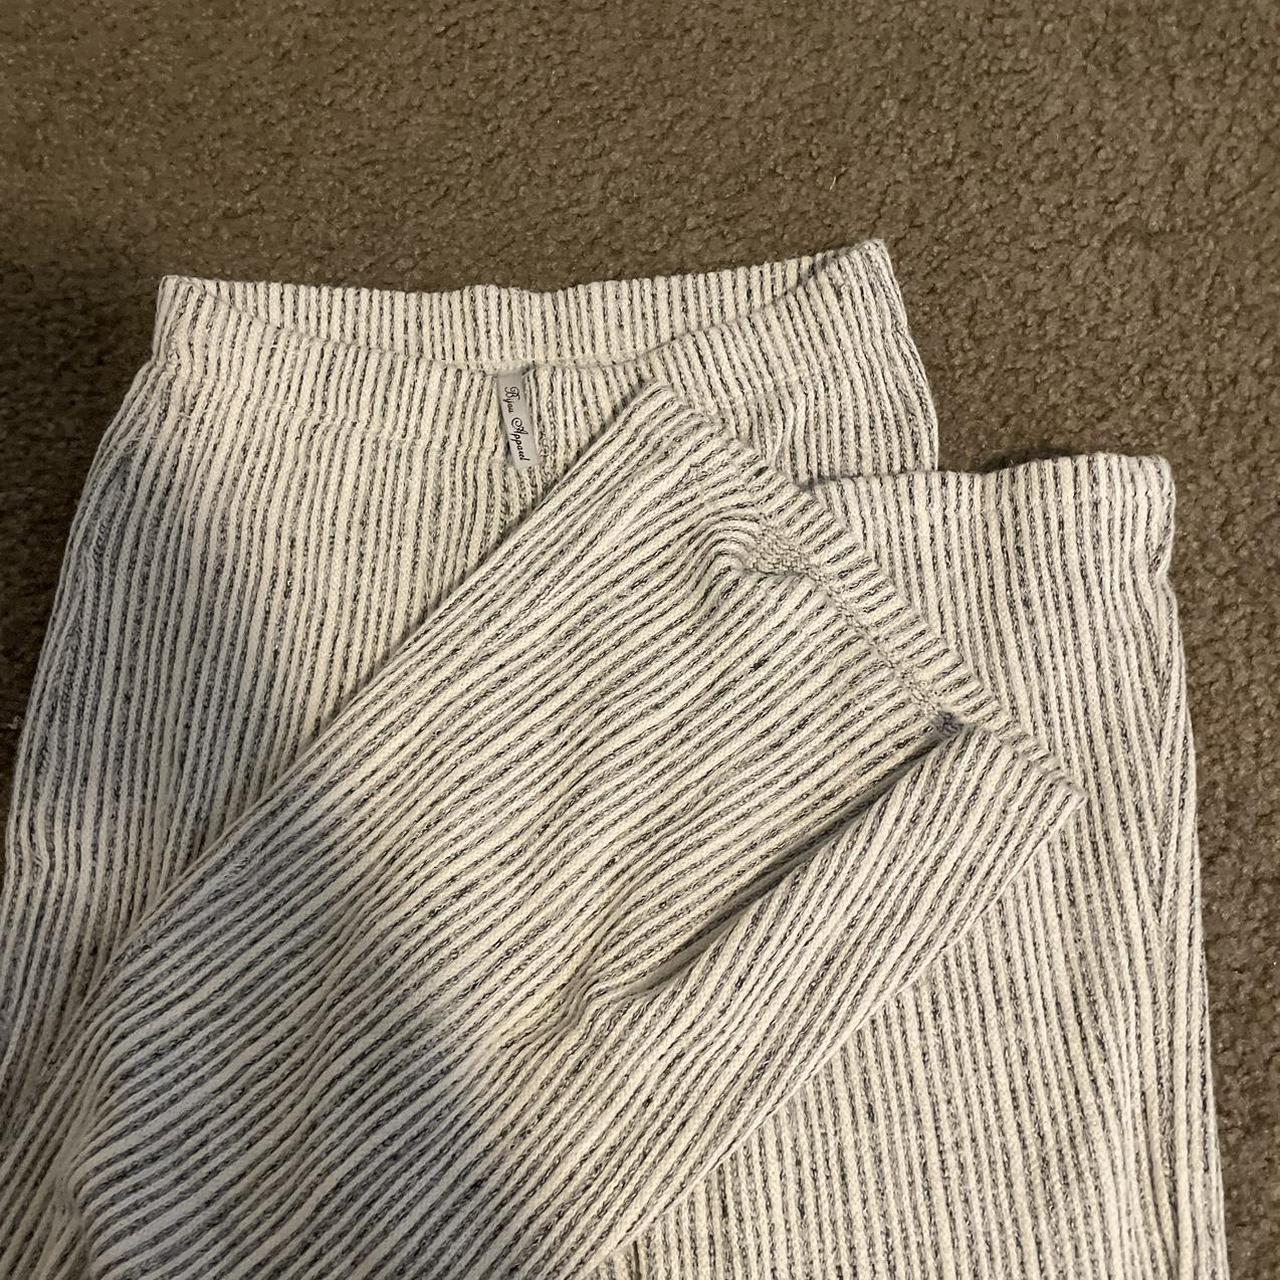 Free People Women's White and Cream Trousers